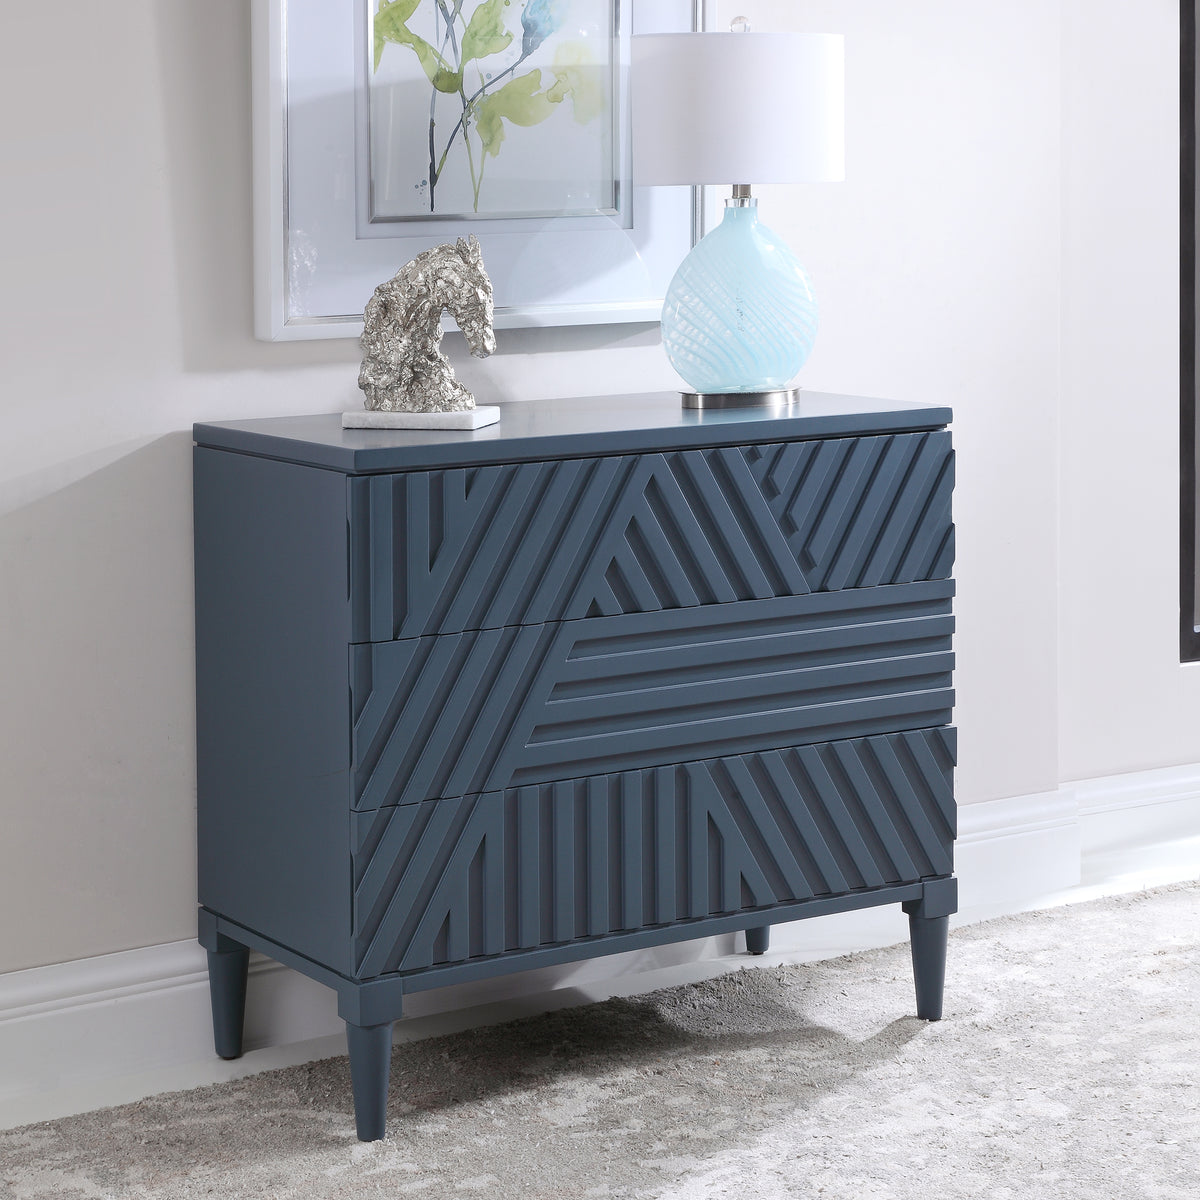 Uttermost Colby Blue Drawer Chest